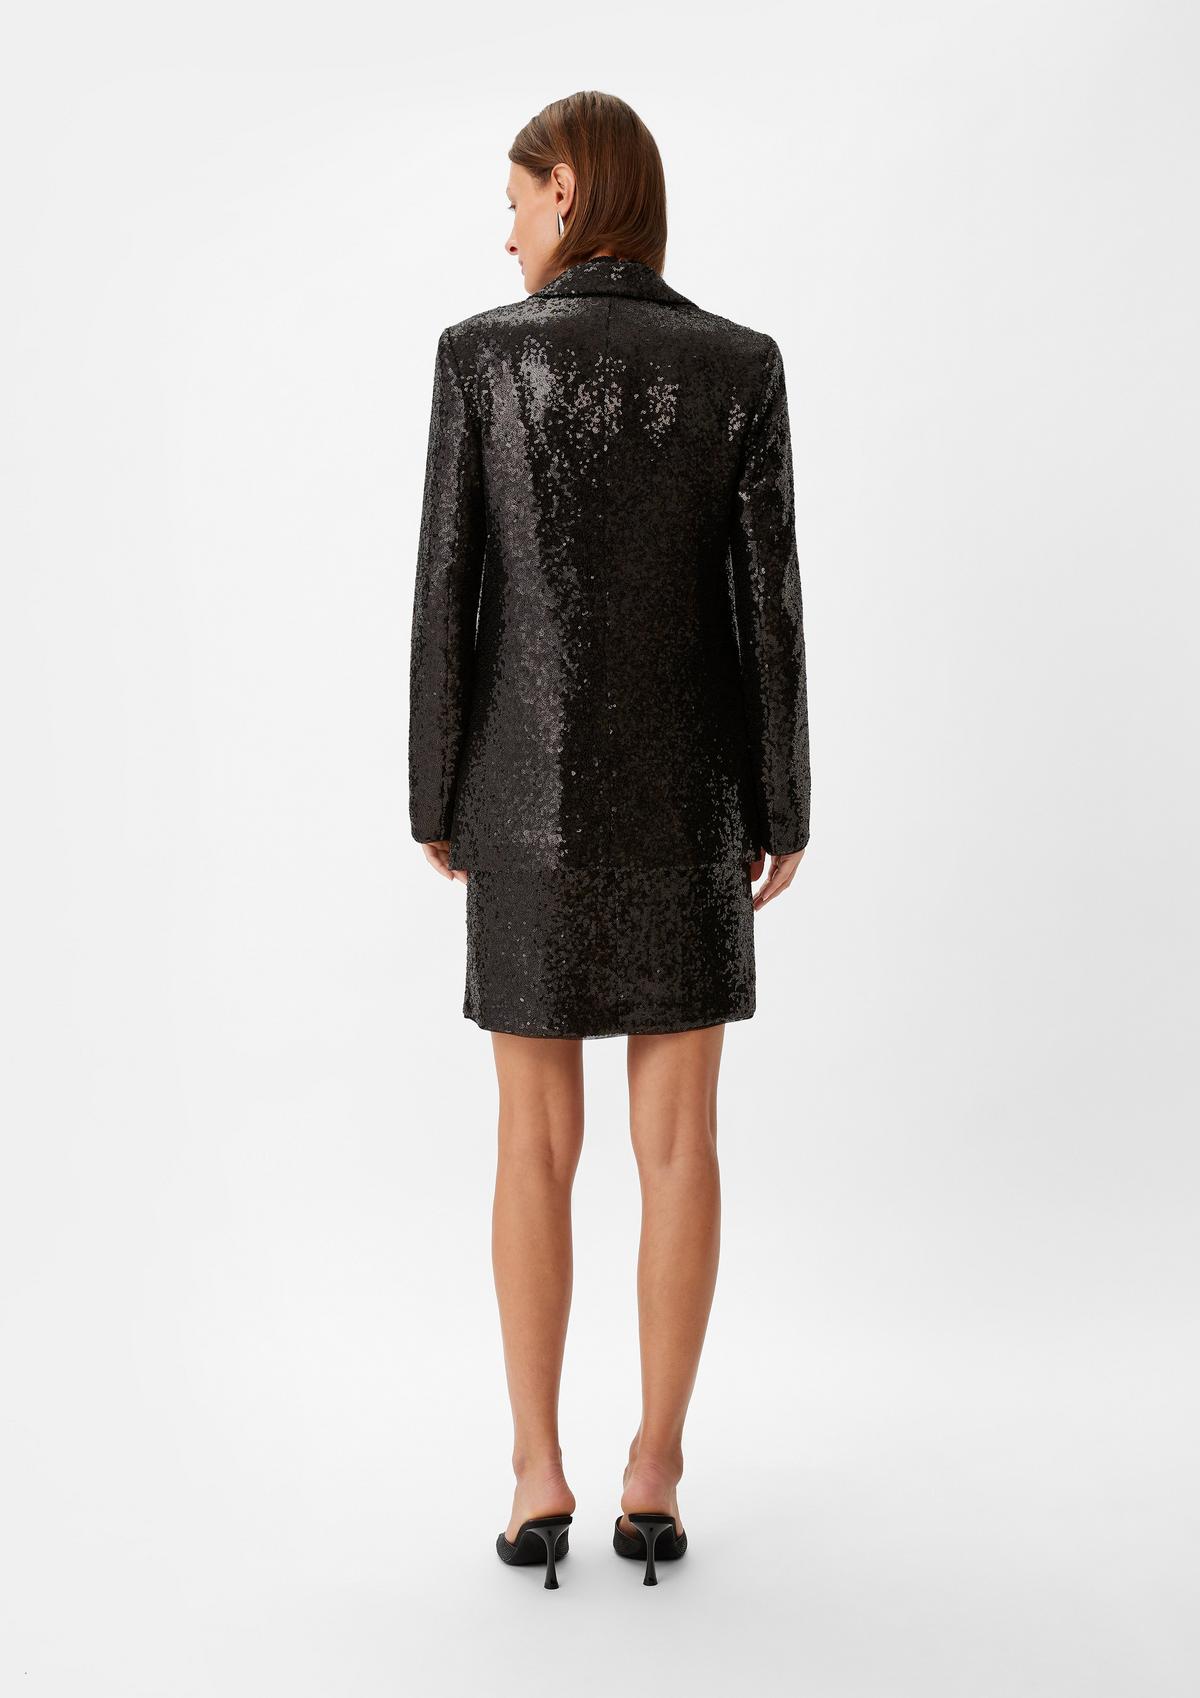 comma Long blazer with sequins